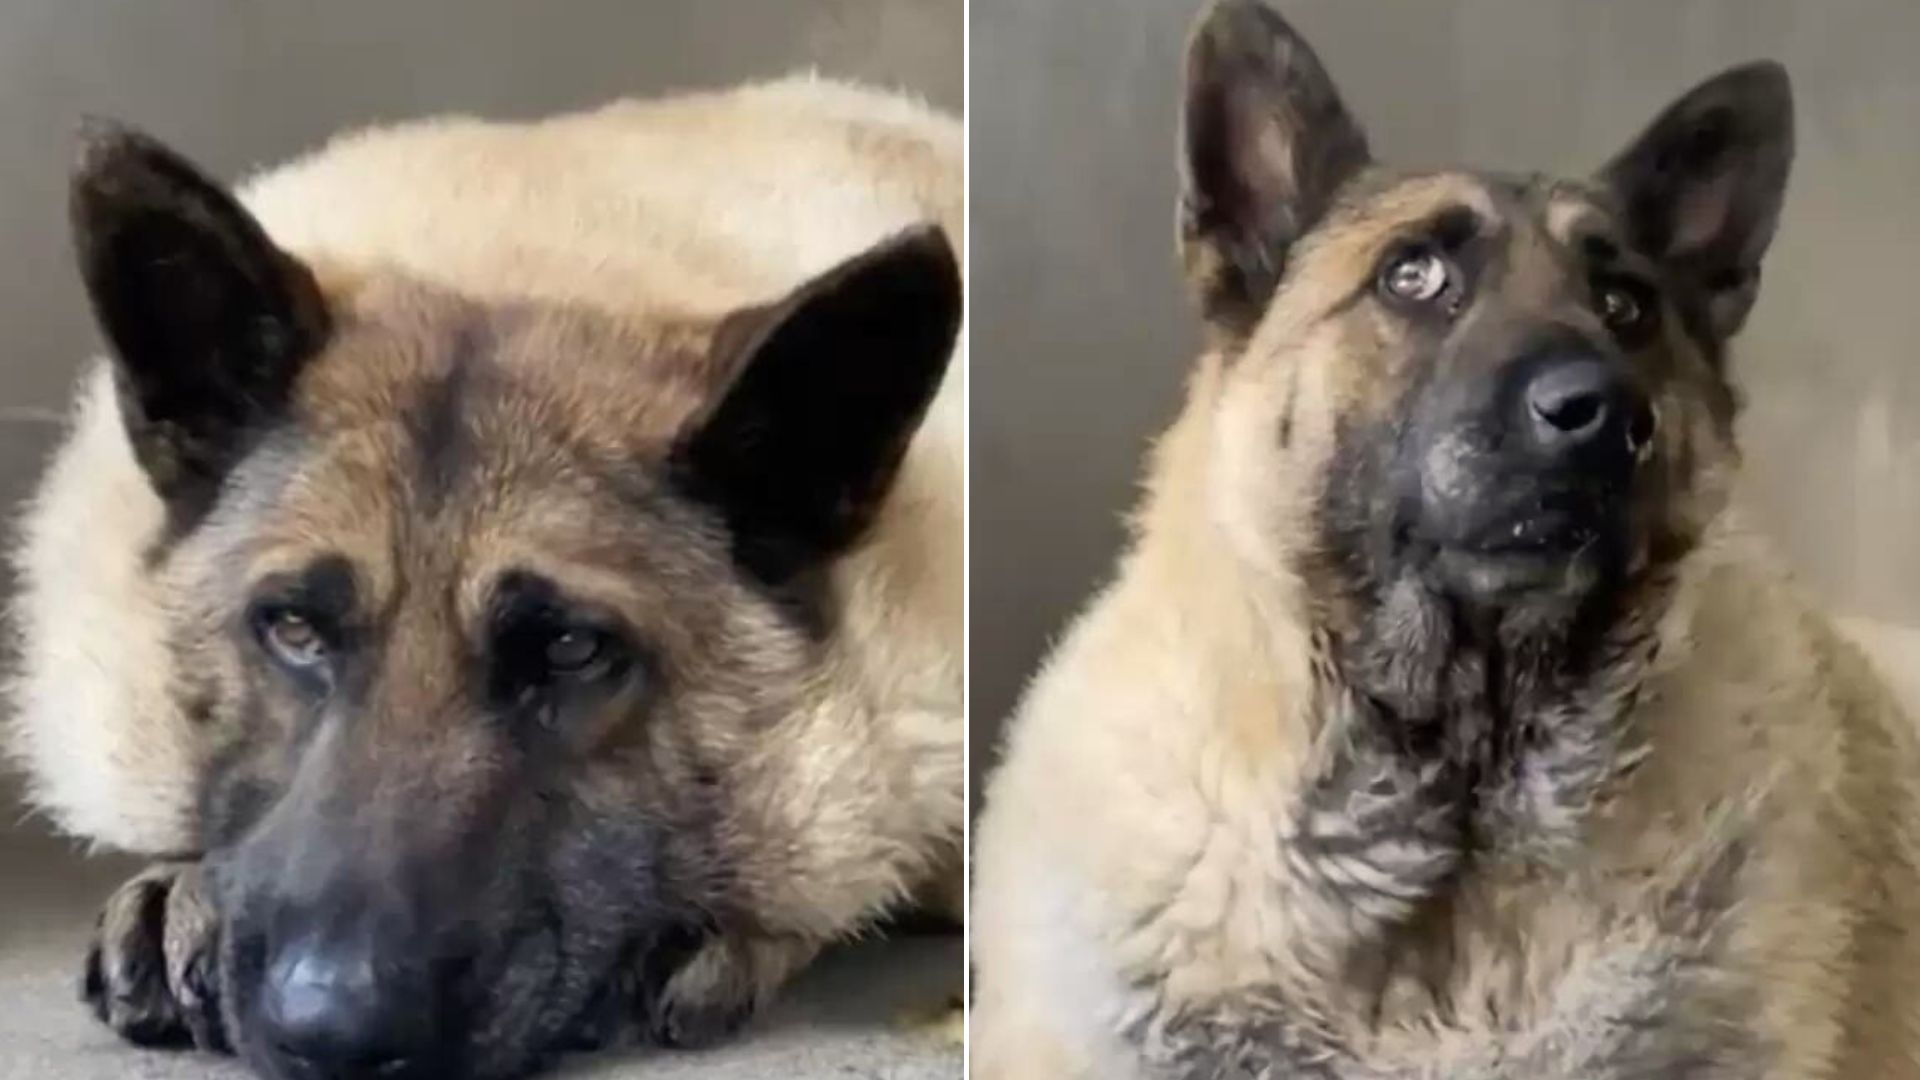 The Rescuers Were Shocked At How Desperately Overweight This Stray Dog Was